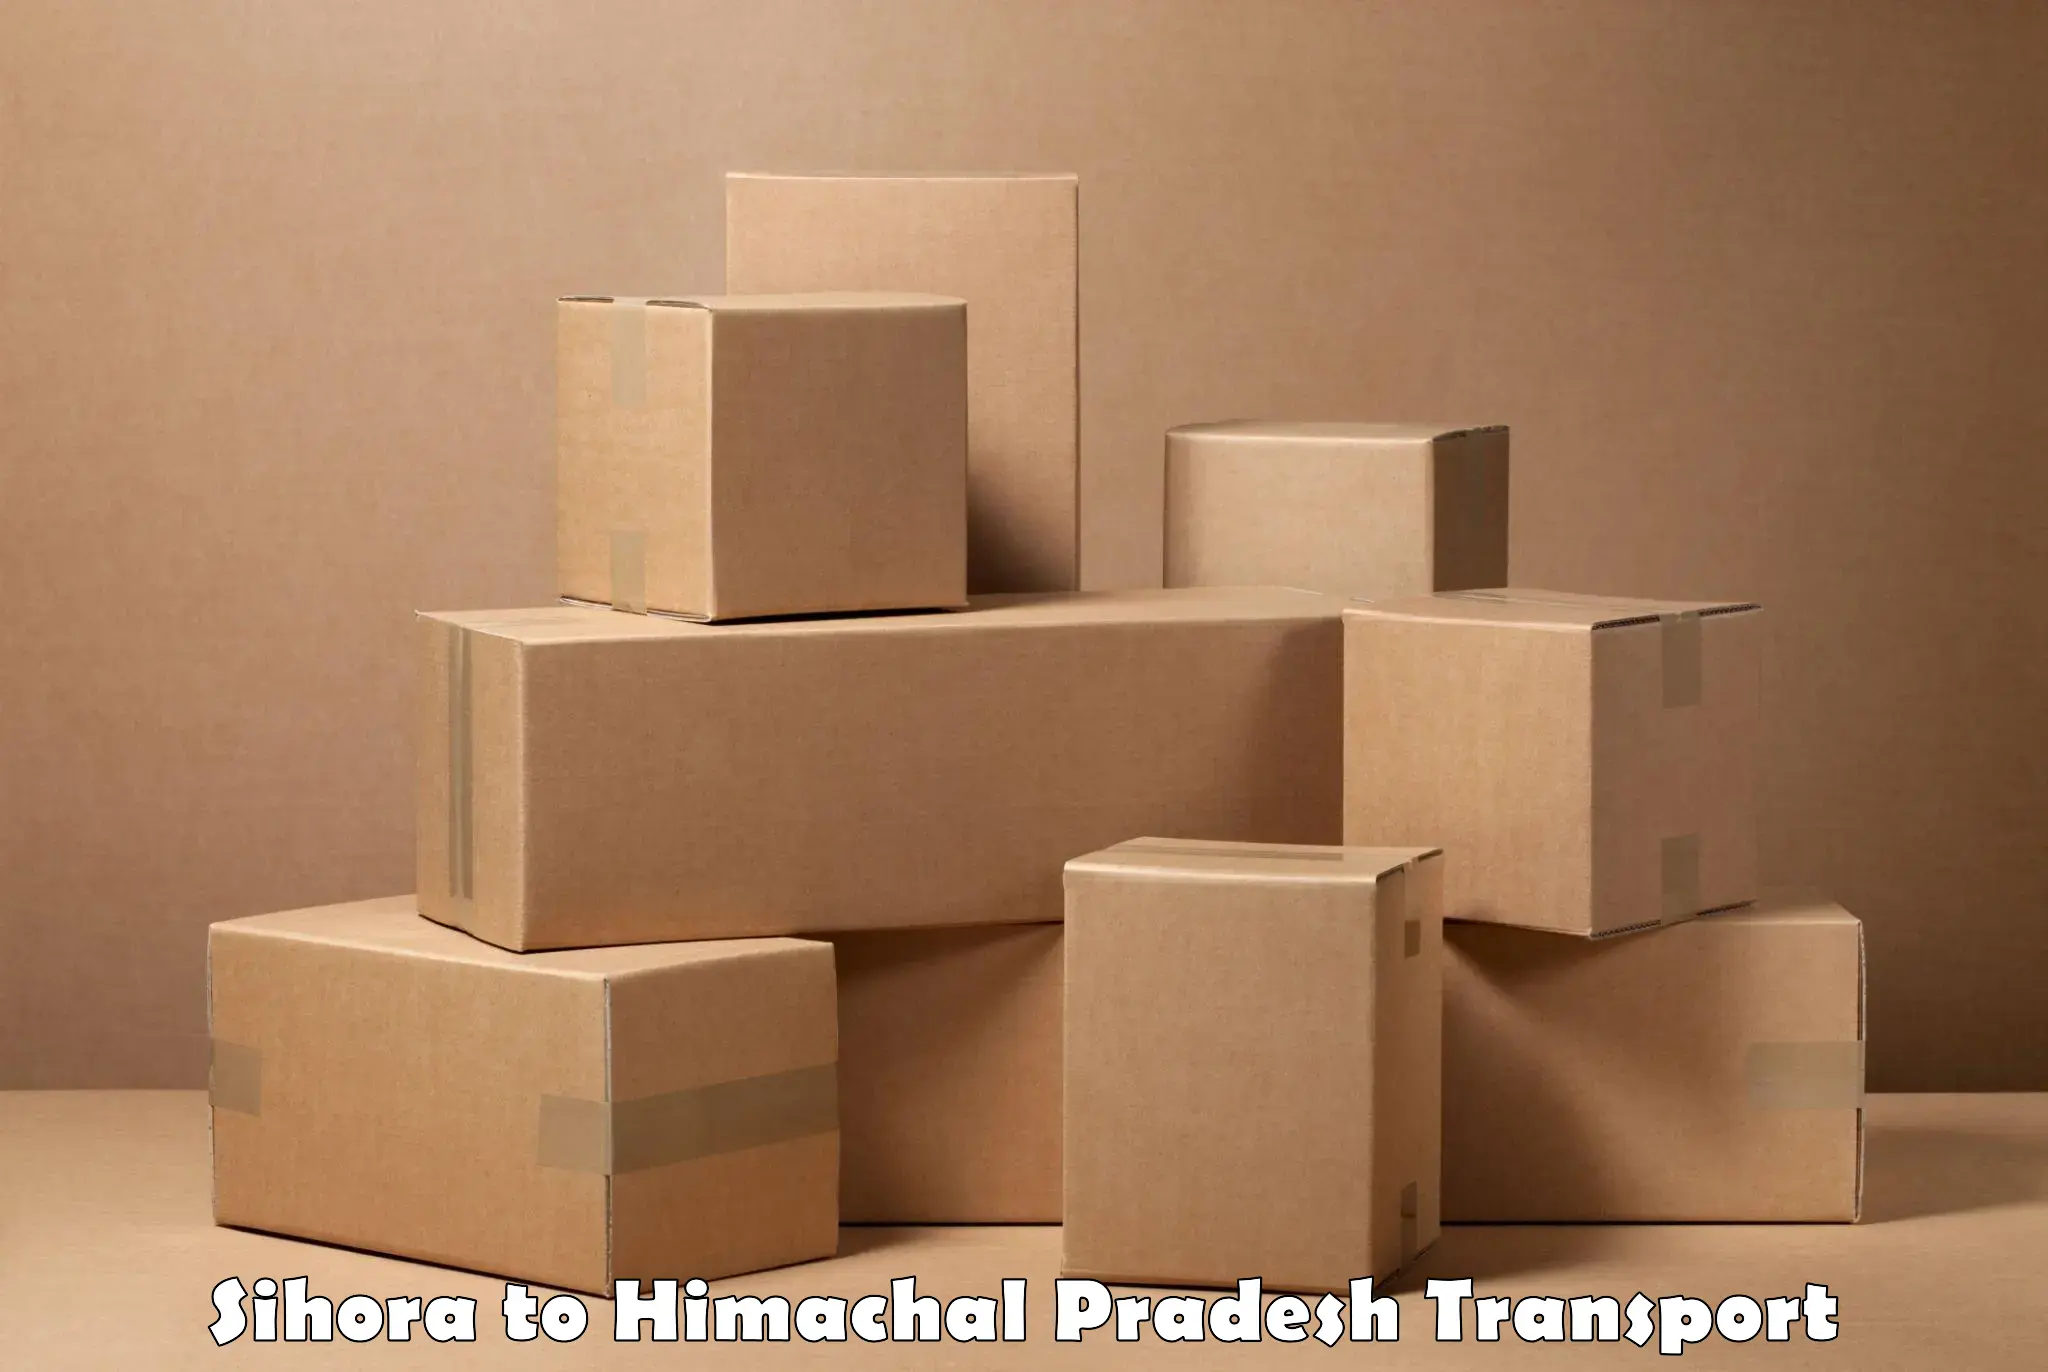 Truck transport companies in India Sihora to Nalagarh